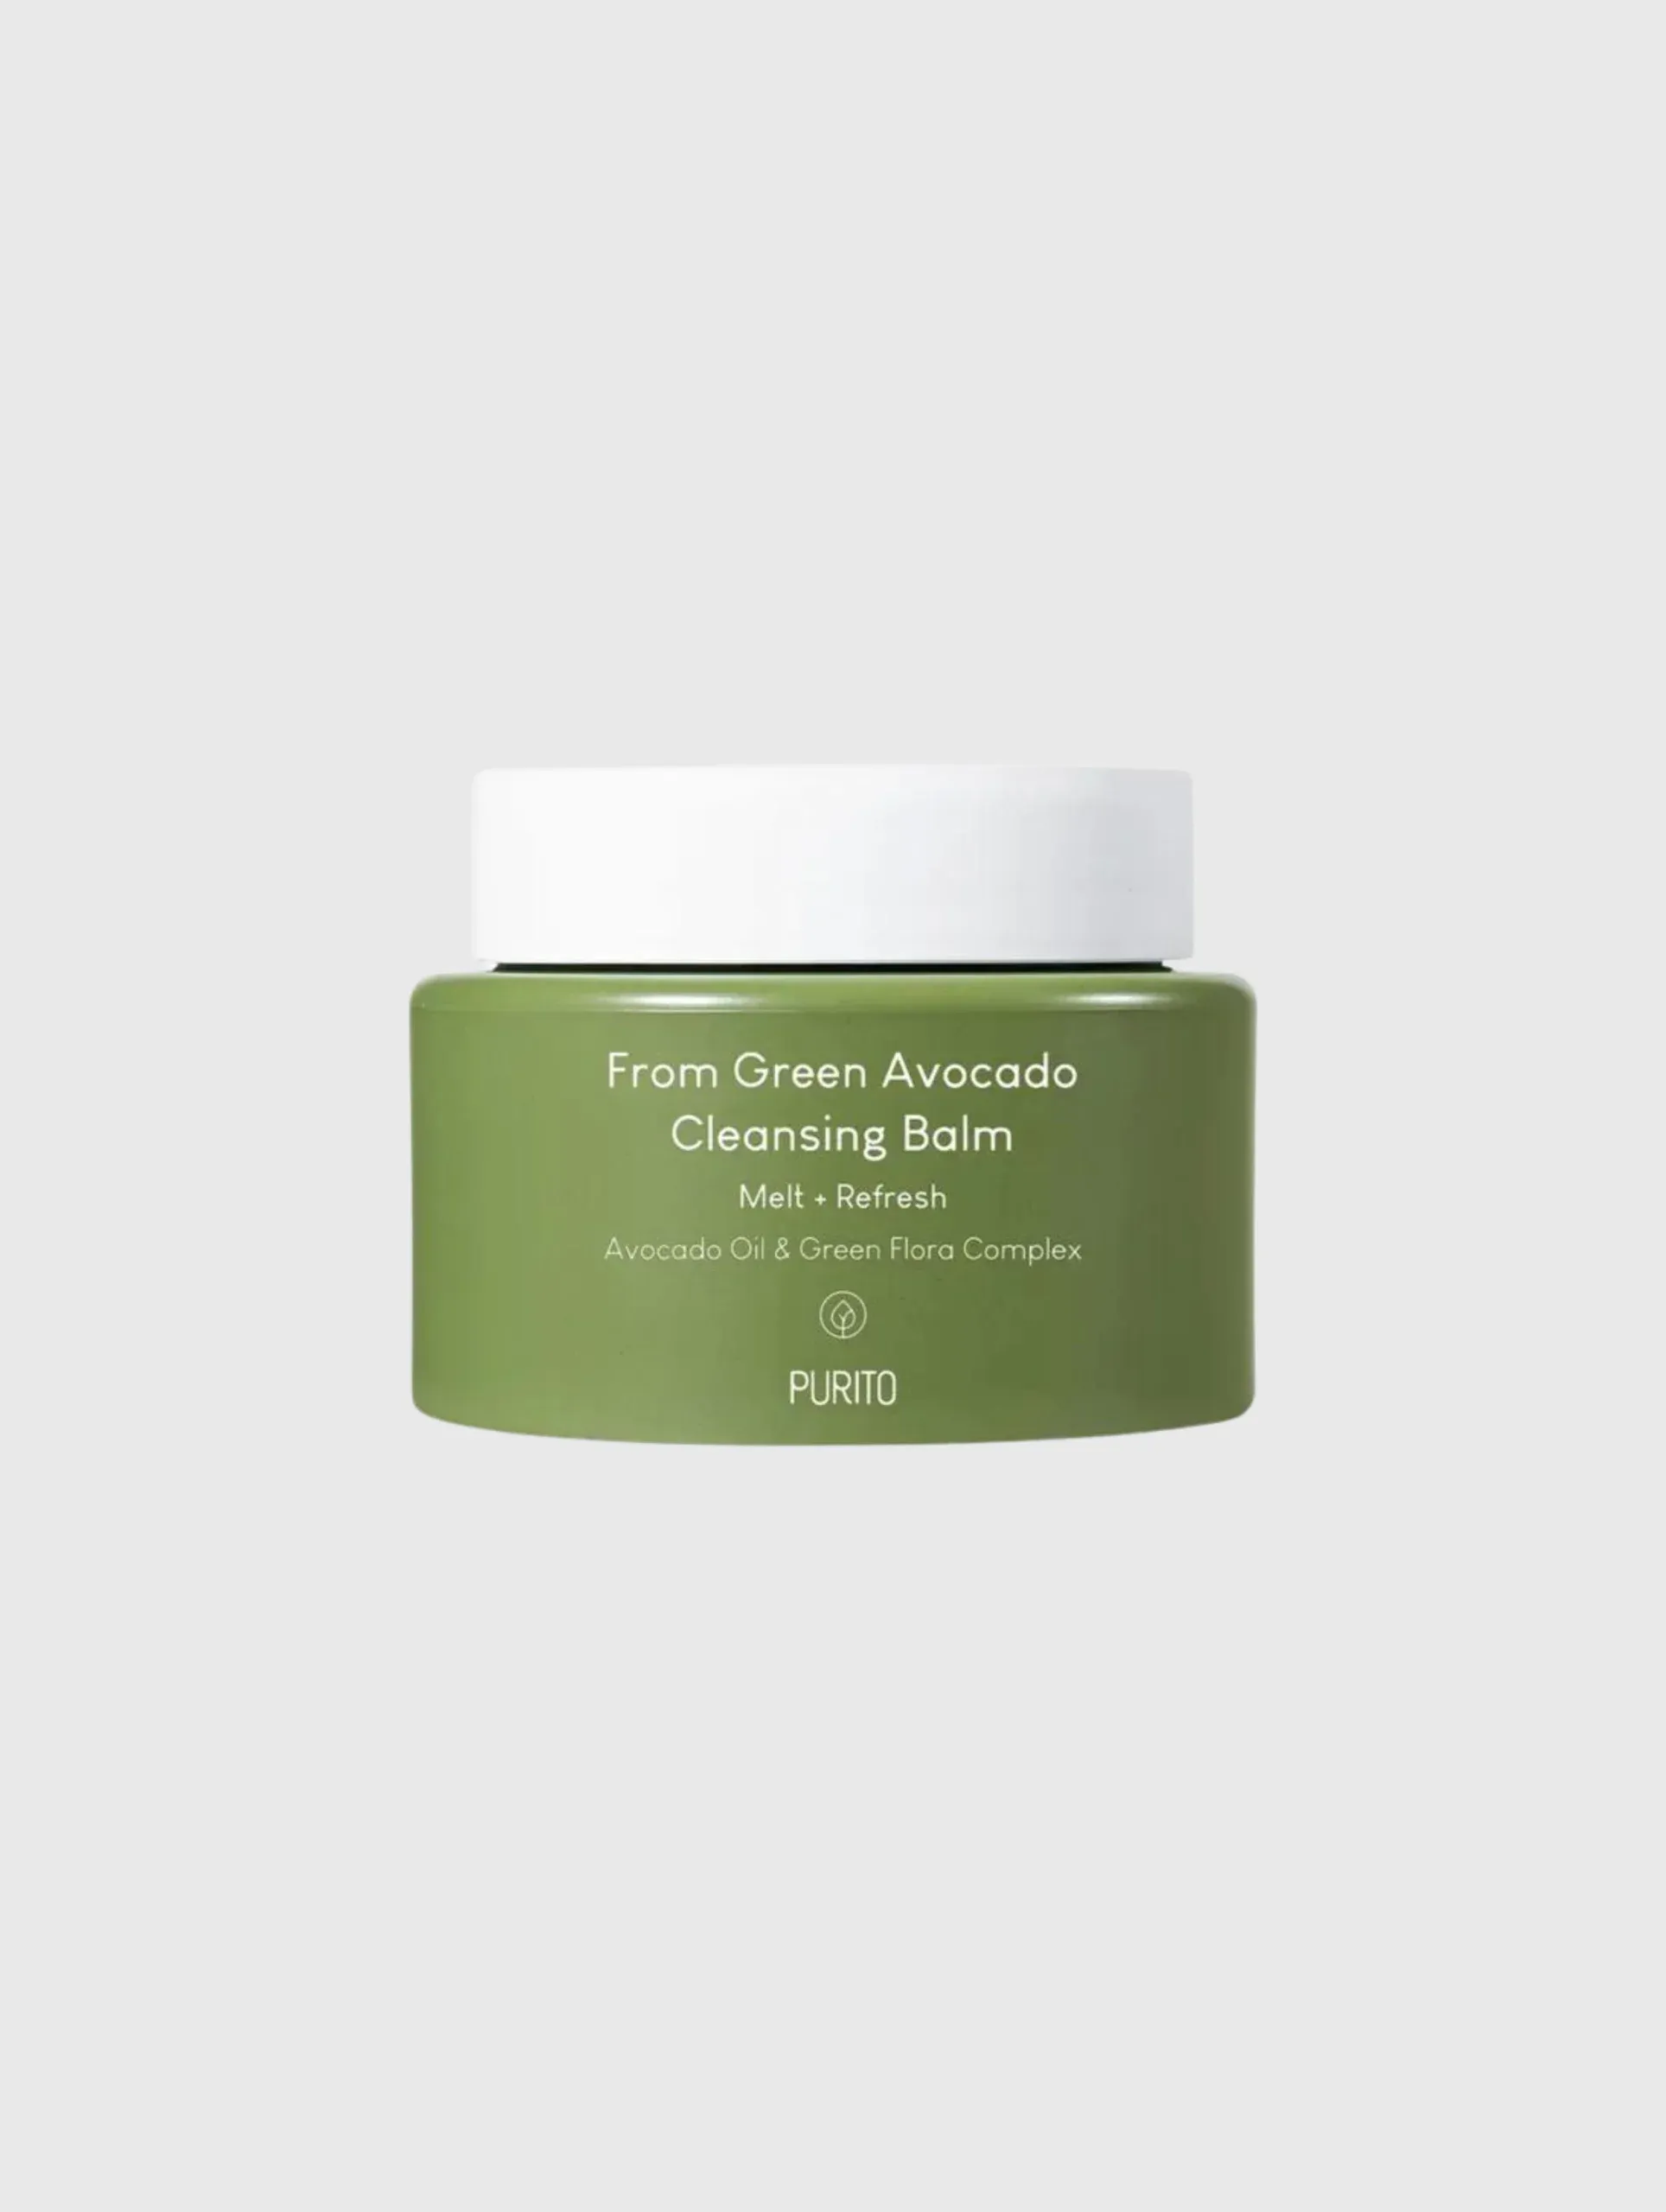 Purito Seoul – From Green Avocado Cleansing Balm 100ml.